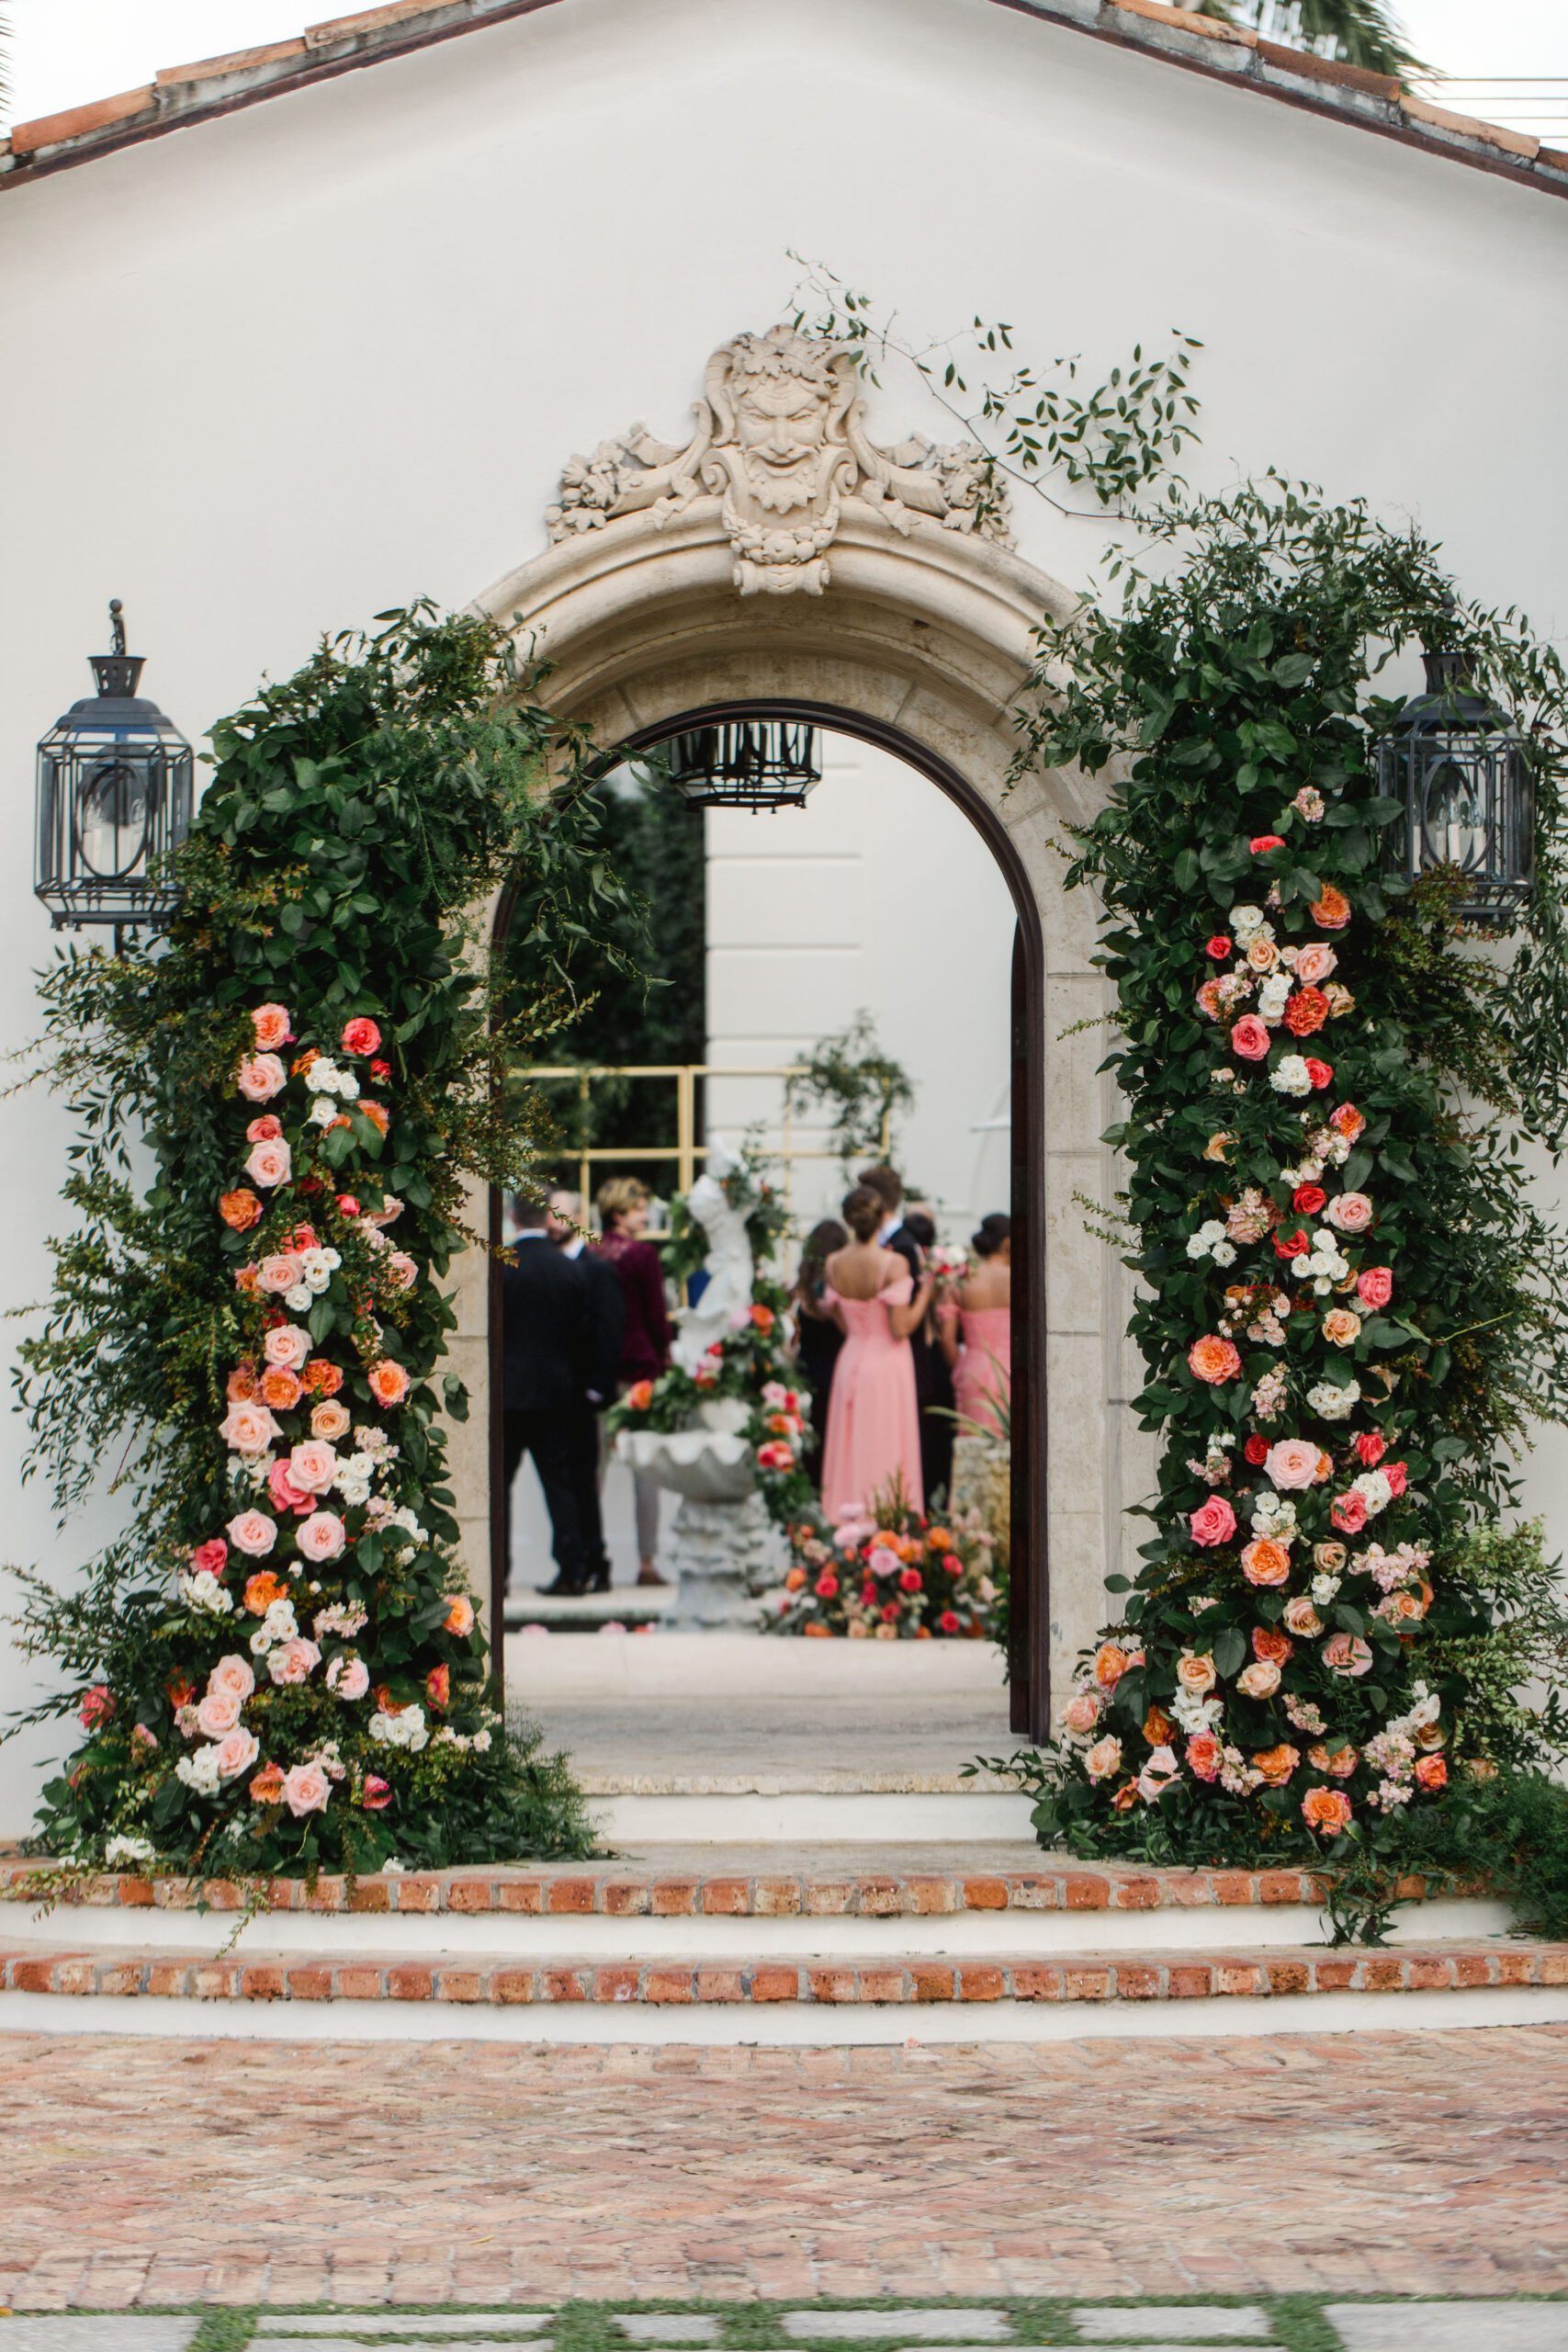 Details of flowers and doorway leading up to Naples Florida Wedding Reception in a backyard